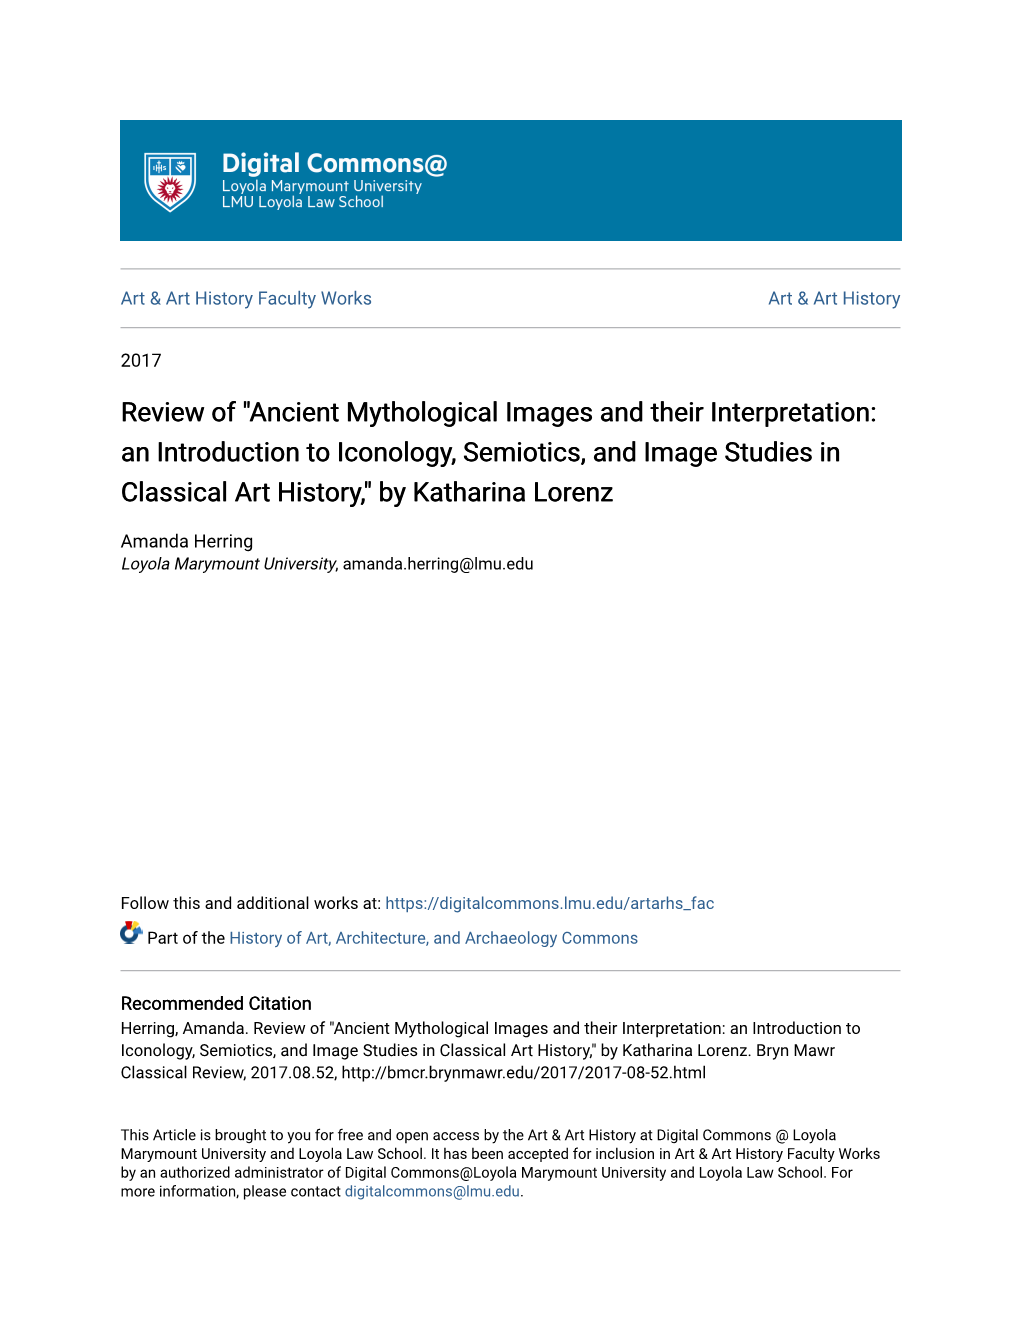 Ancient Mythological Images and Their Interpretation: an Introduction to Iconology, Semiotics, and Image Studies in Classical Art History," by Katharina Lorenz